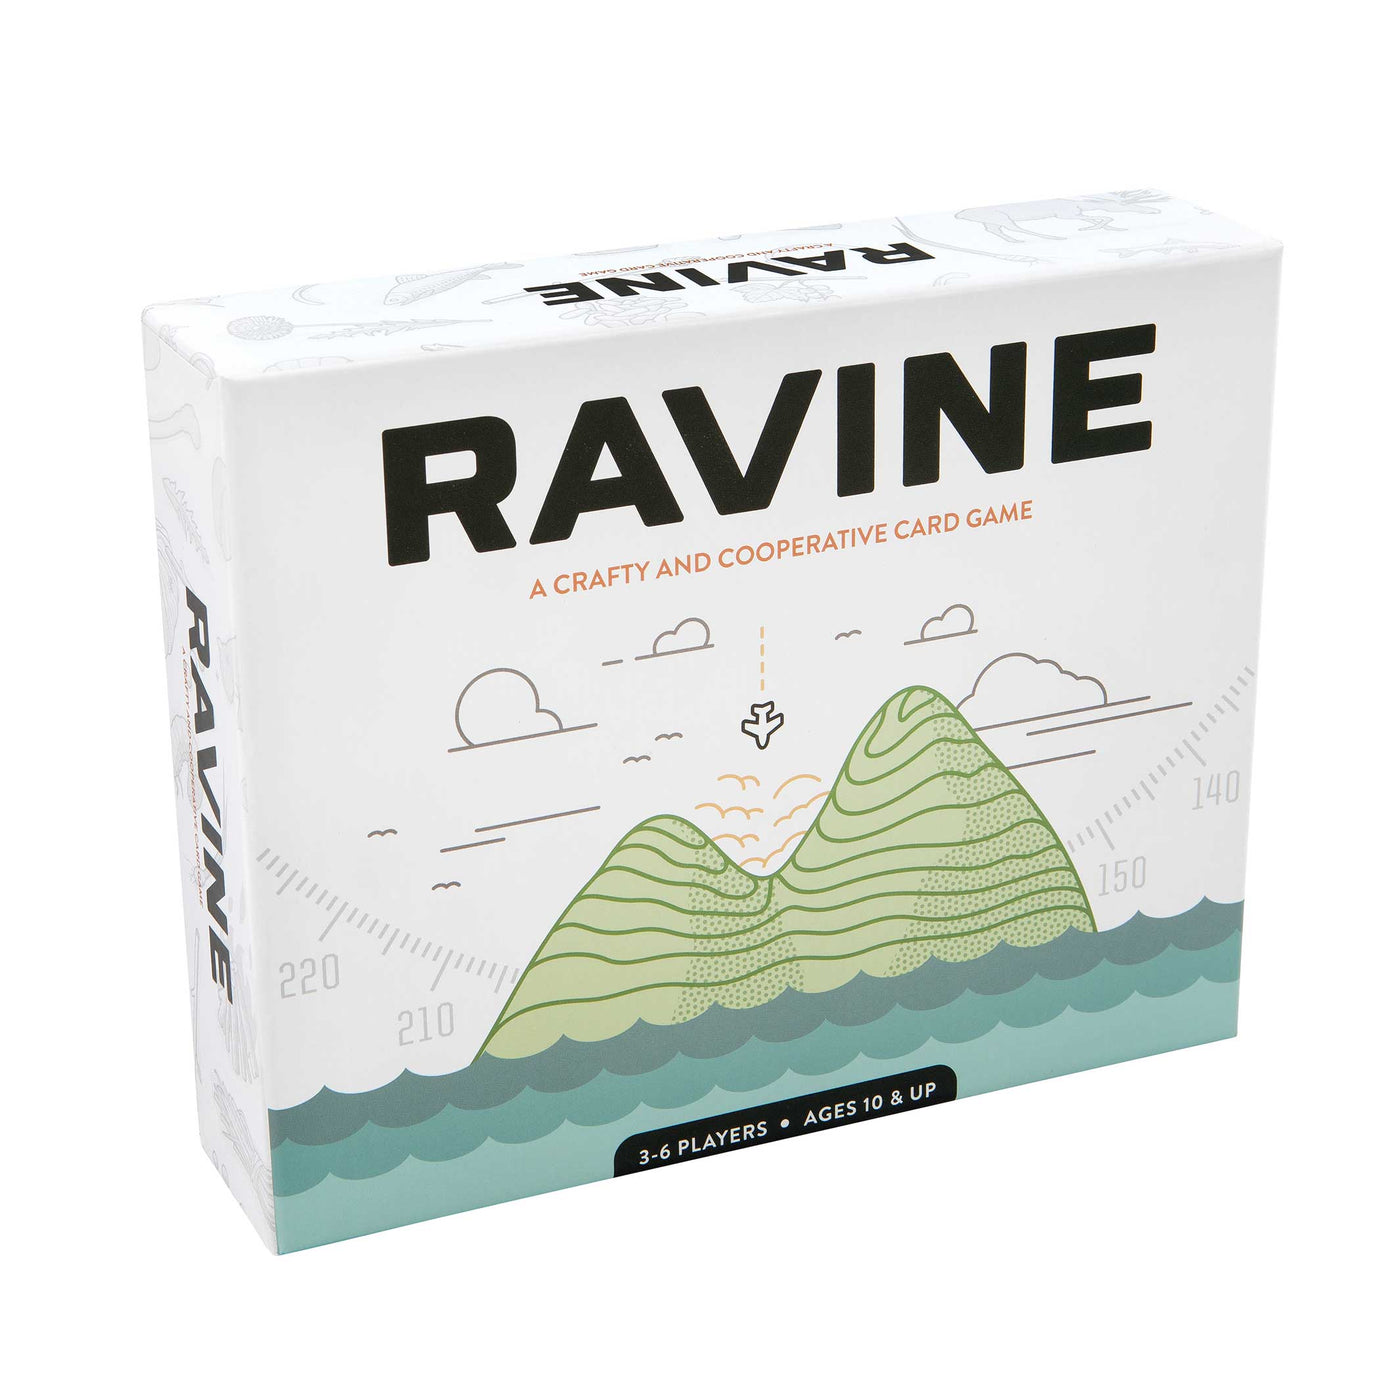 Front of Packaging for Ravine game